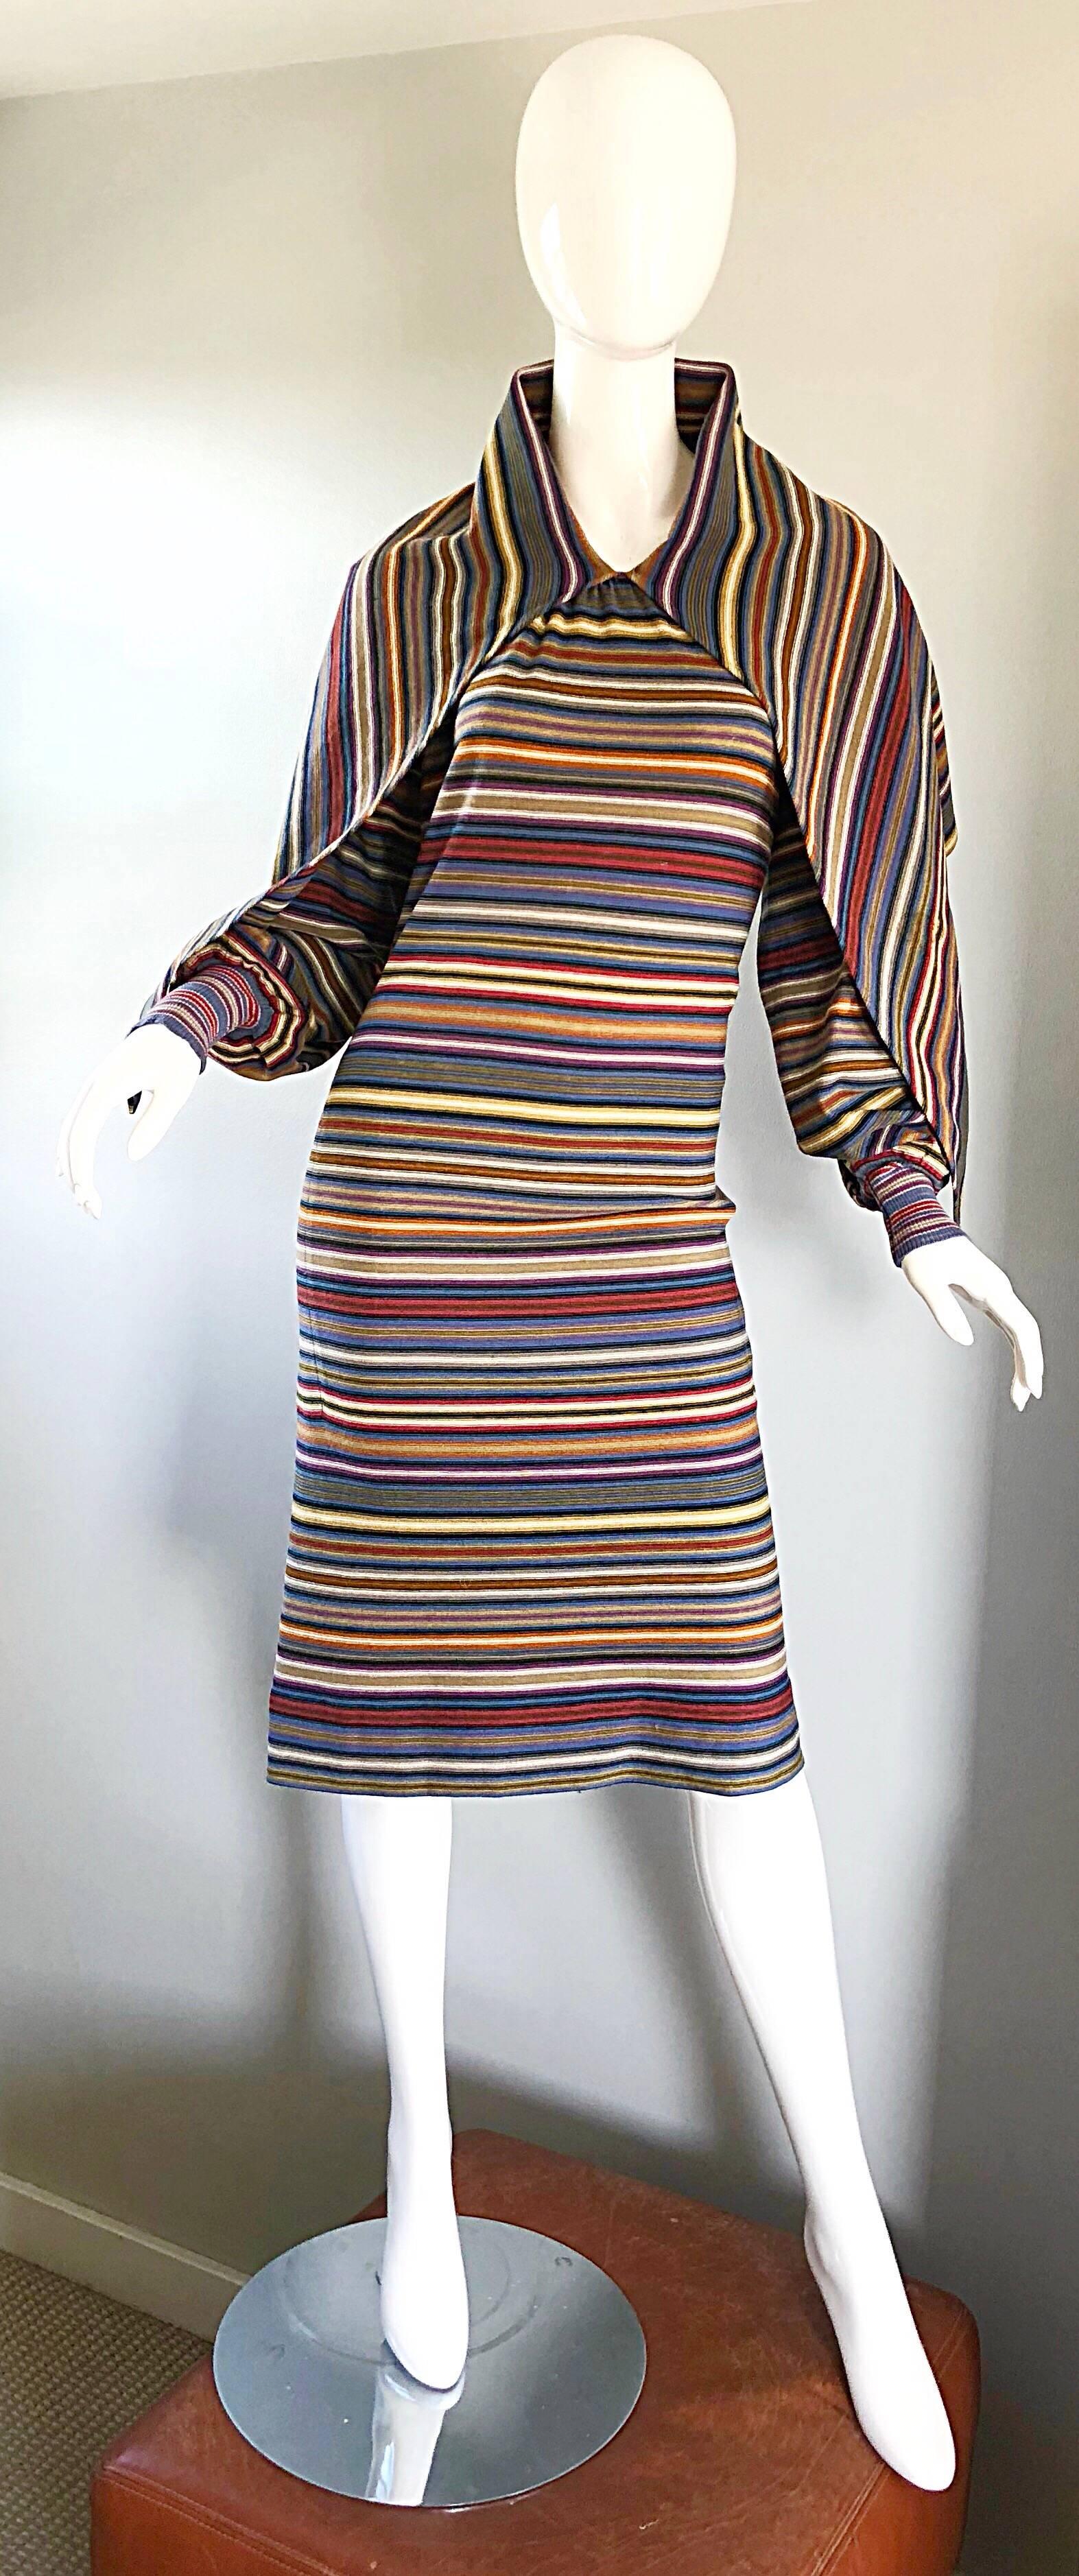 Rare vintage 1970s MISSONI for BONWIT TELLER long sleeve striped wool dress, with attached cape! Defintely a musuem worthy piece! Features signature Missoni colors in purple, blue, yellow, orange, red, ivory, and green. Attached cape drapes across